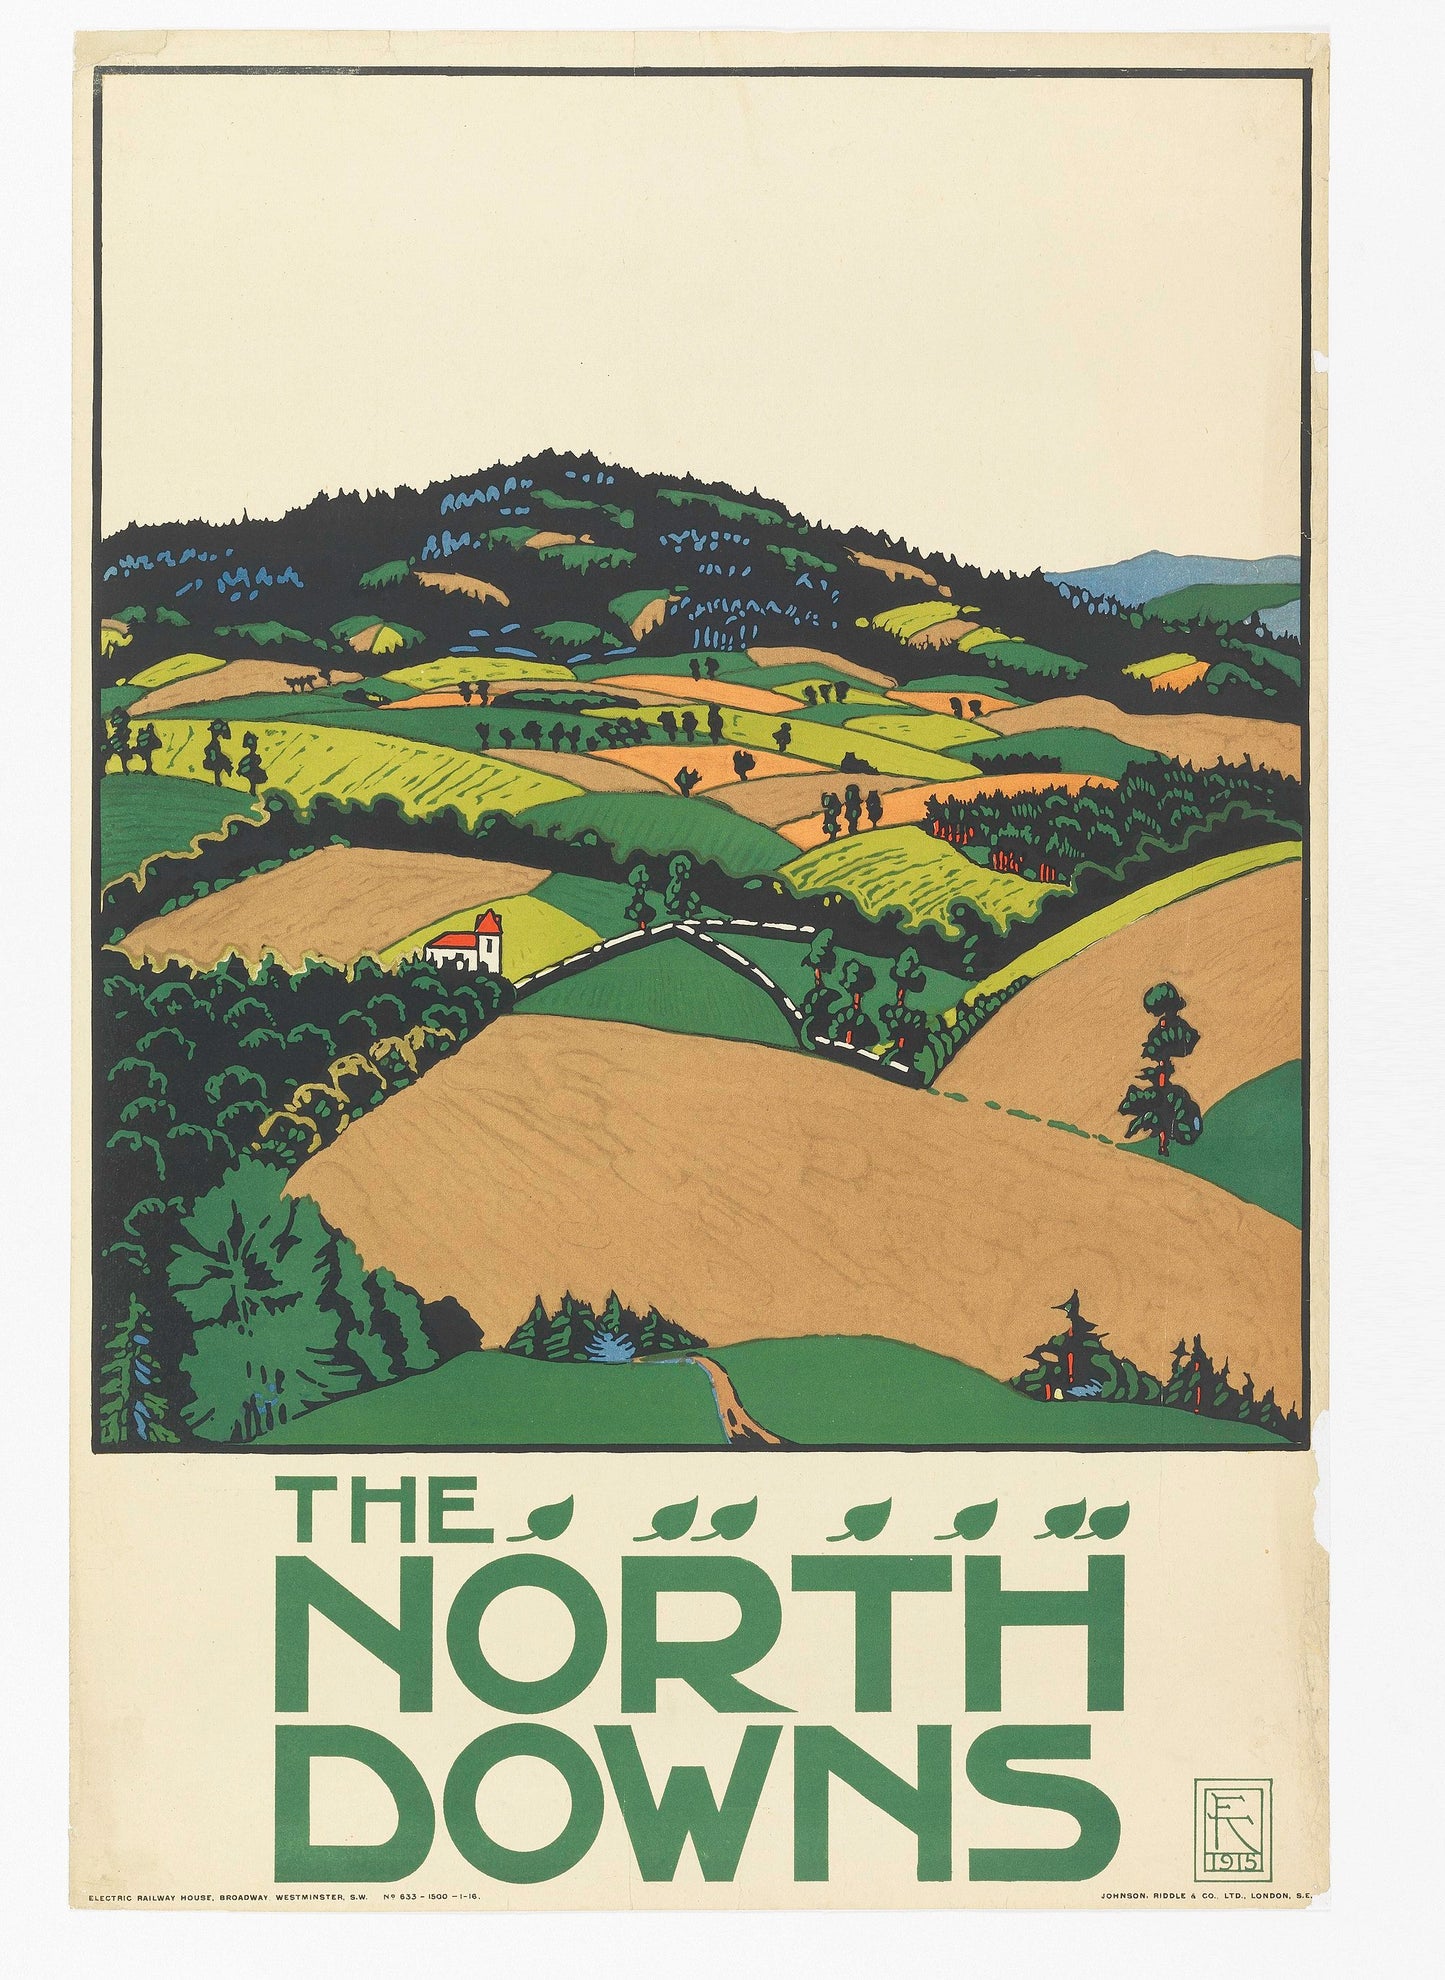 The North Downs art print (1915) | Kauffer | London Underground Vintage Posters  The Trumpet Shop   